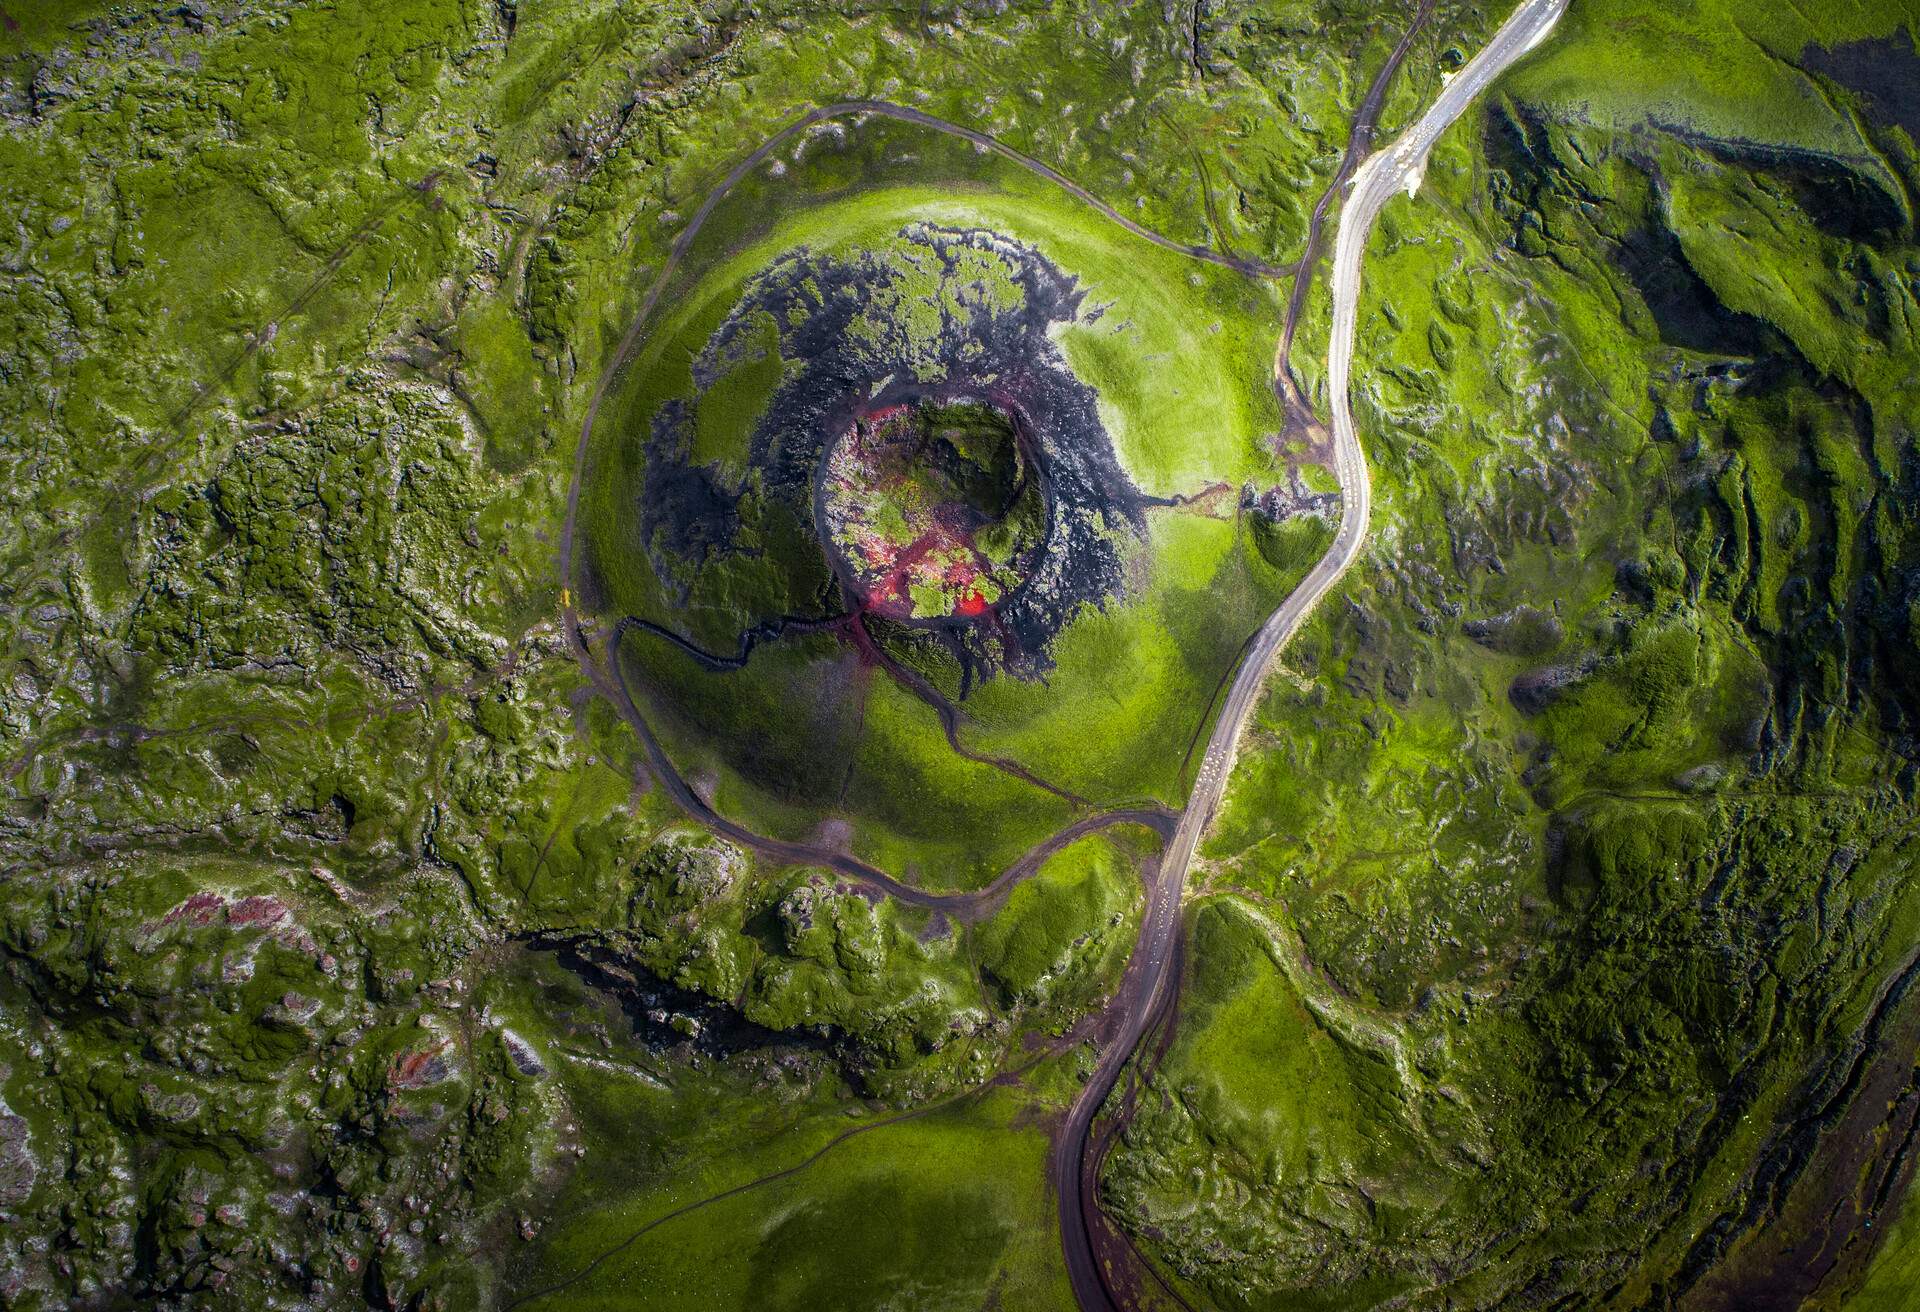 Fjallabak is Nature Reserve area in the highlands of Iceland. It has volcanic activity and the vivid colors are due to the rhyolite and obsidian making the ground appear blue, green, red, pink and yellow.